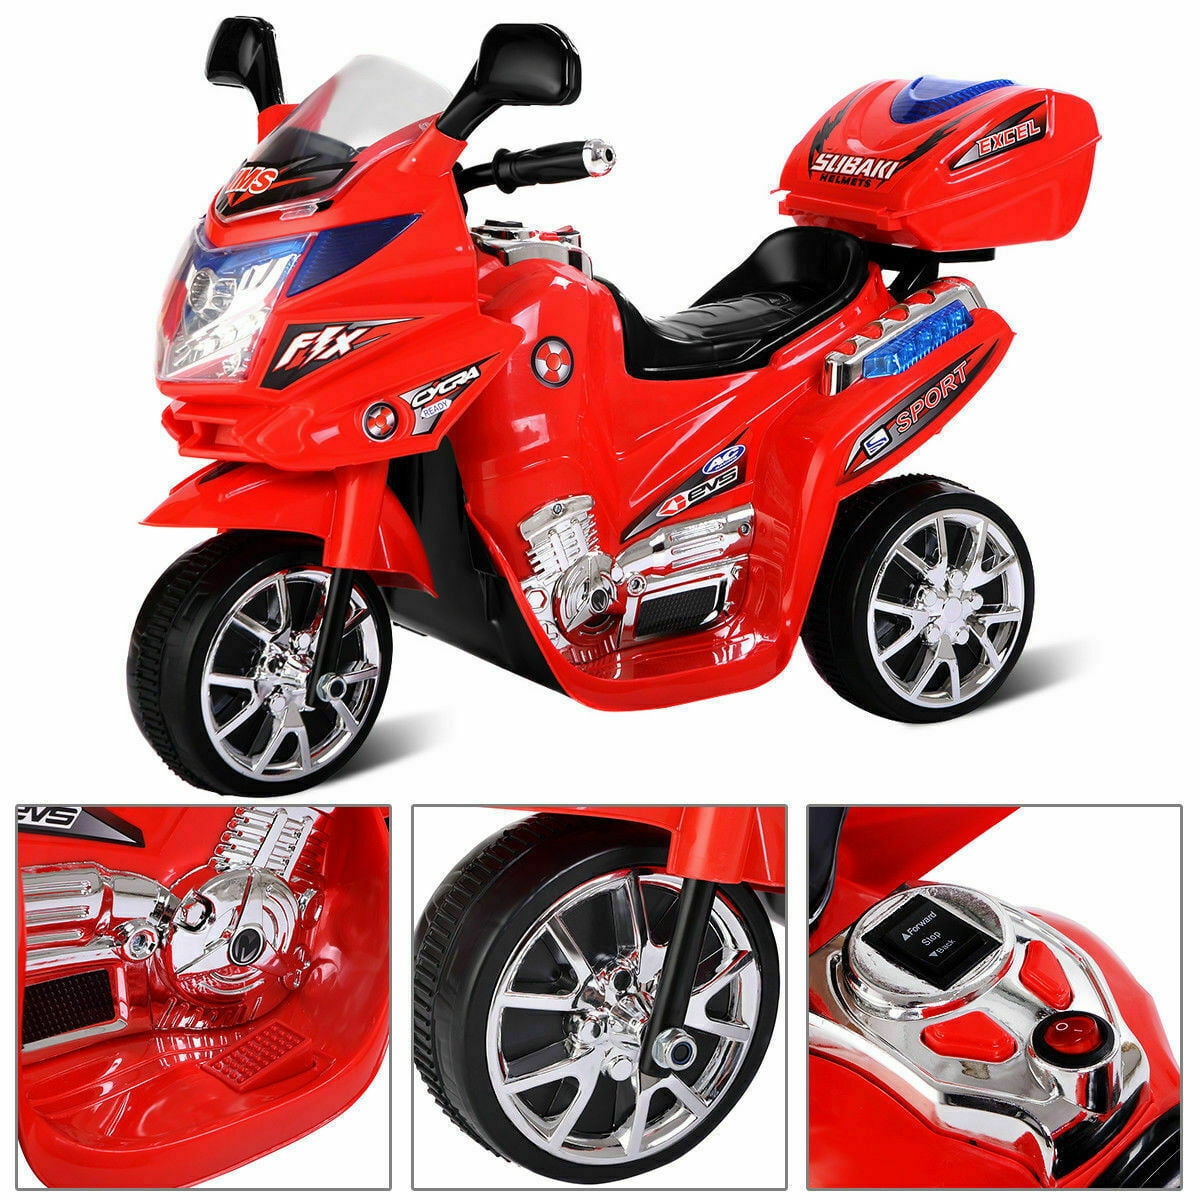 Babyjoy 3 Wheel Kids Ride On Motorcycle 6V Battery Powered Electric Toy Pink